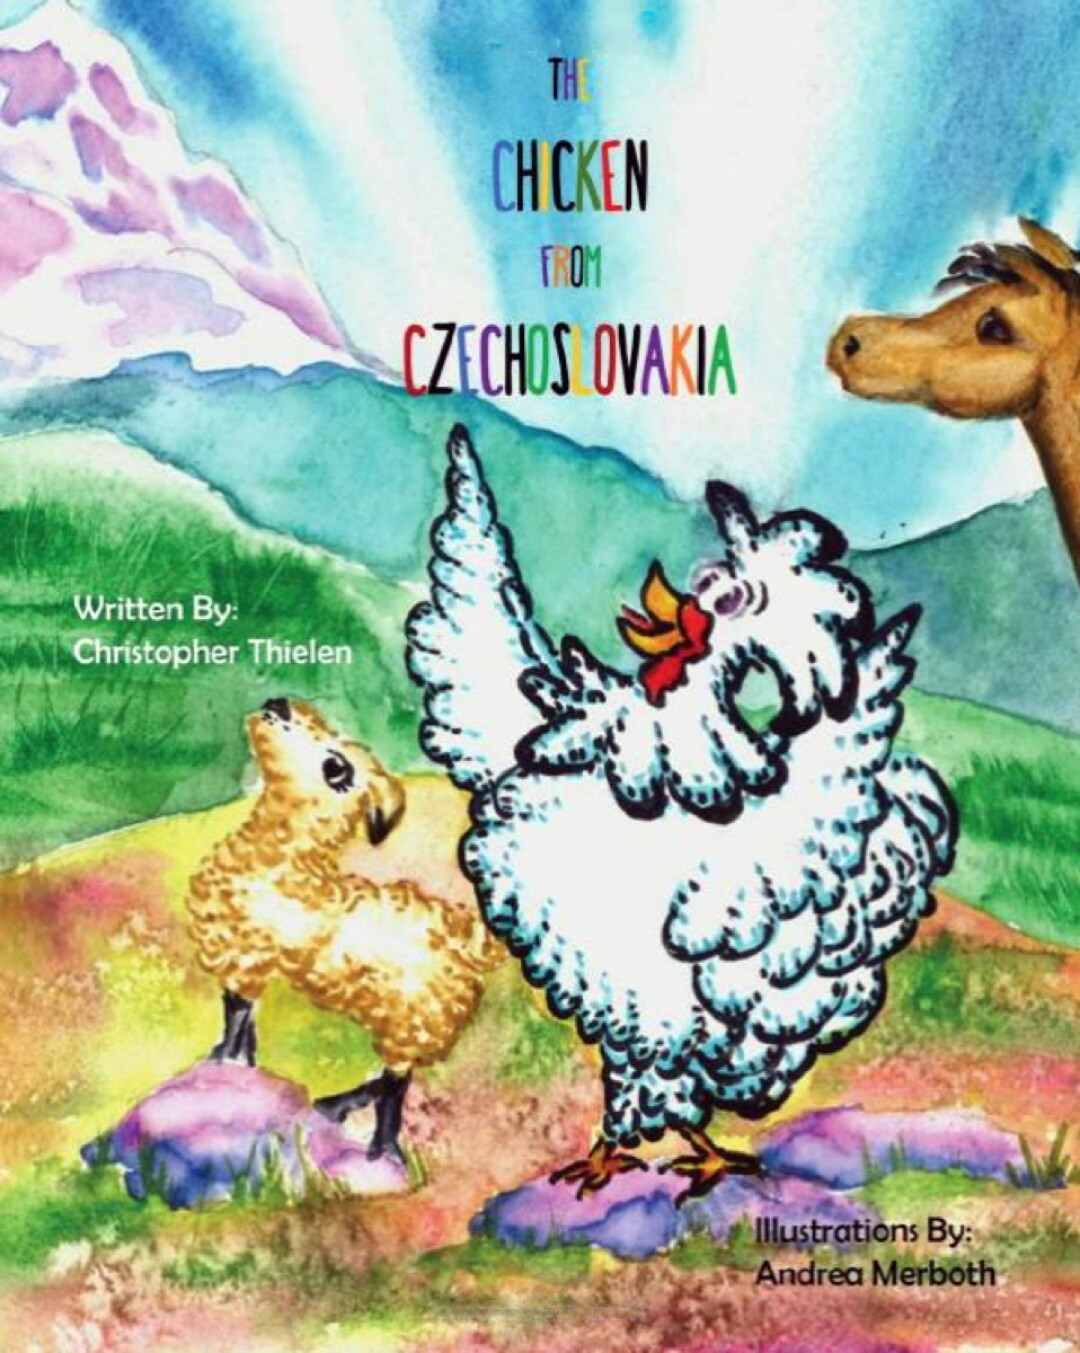 Cover art for the Chicken From Czechoslovakia